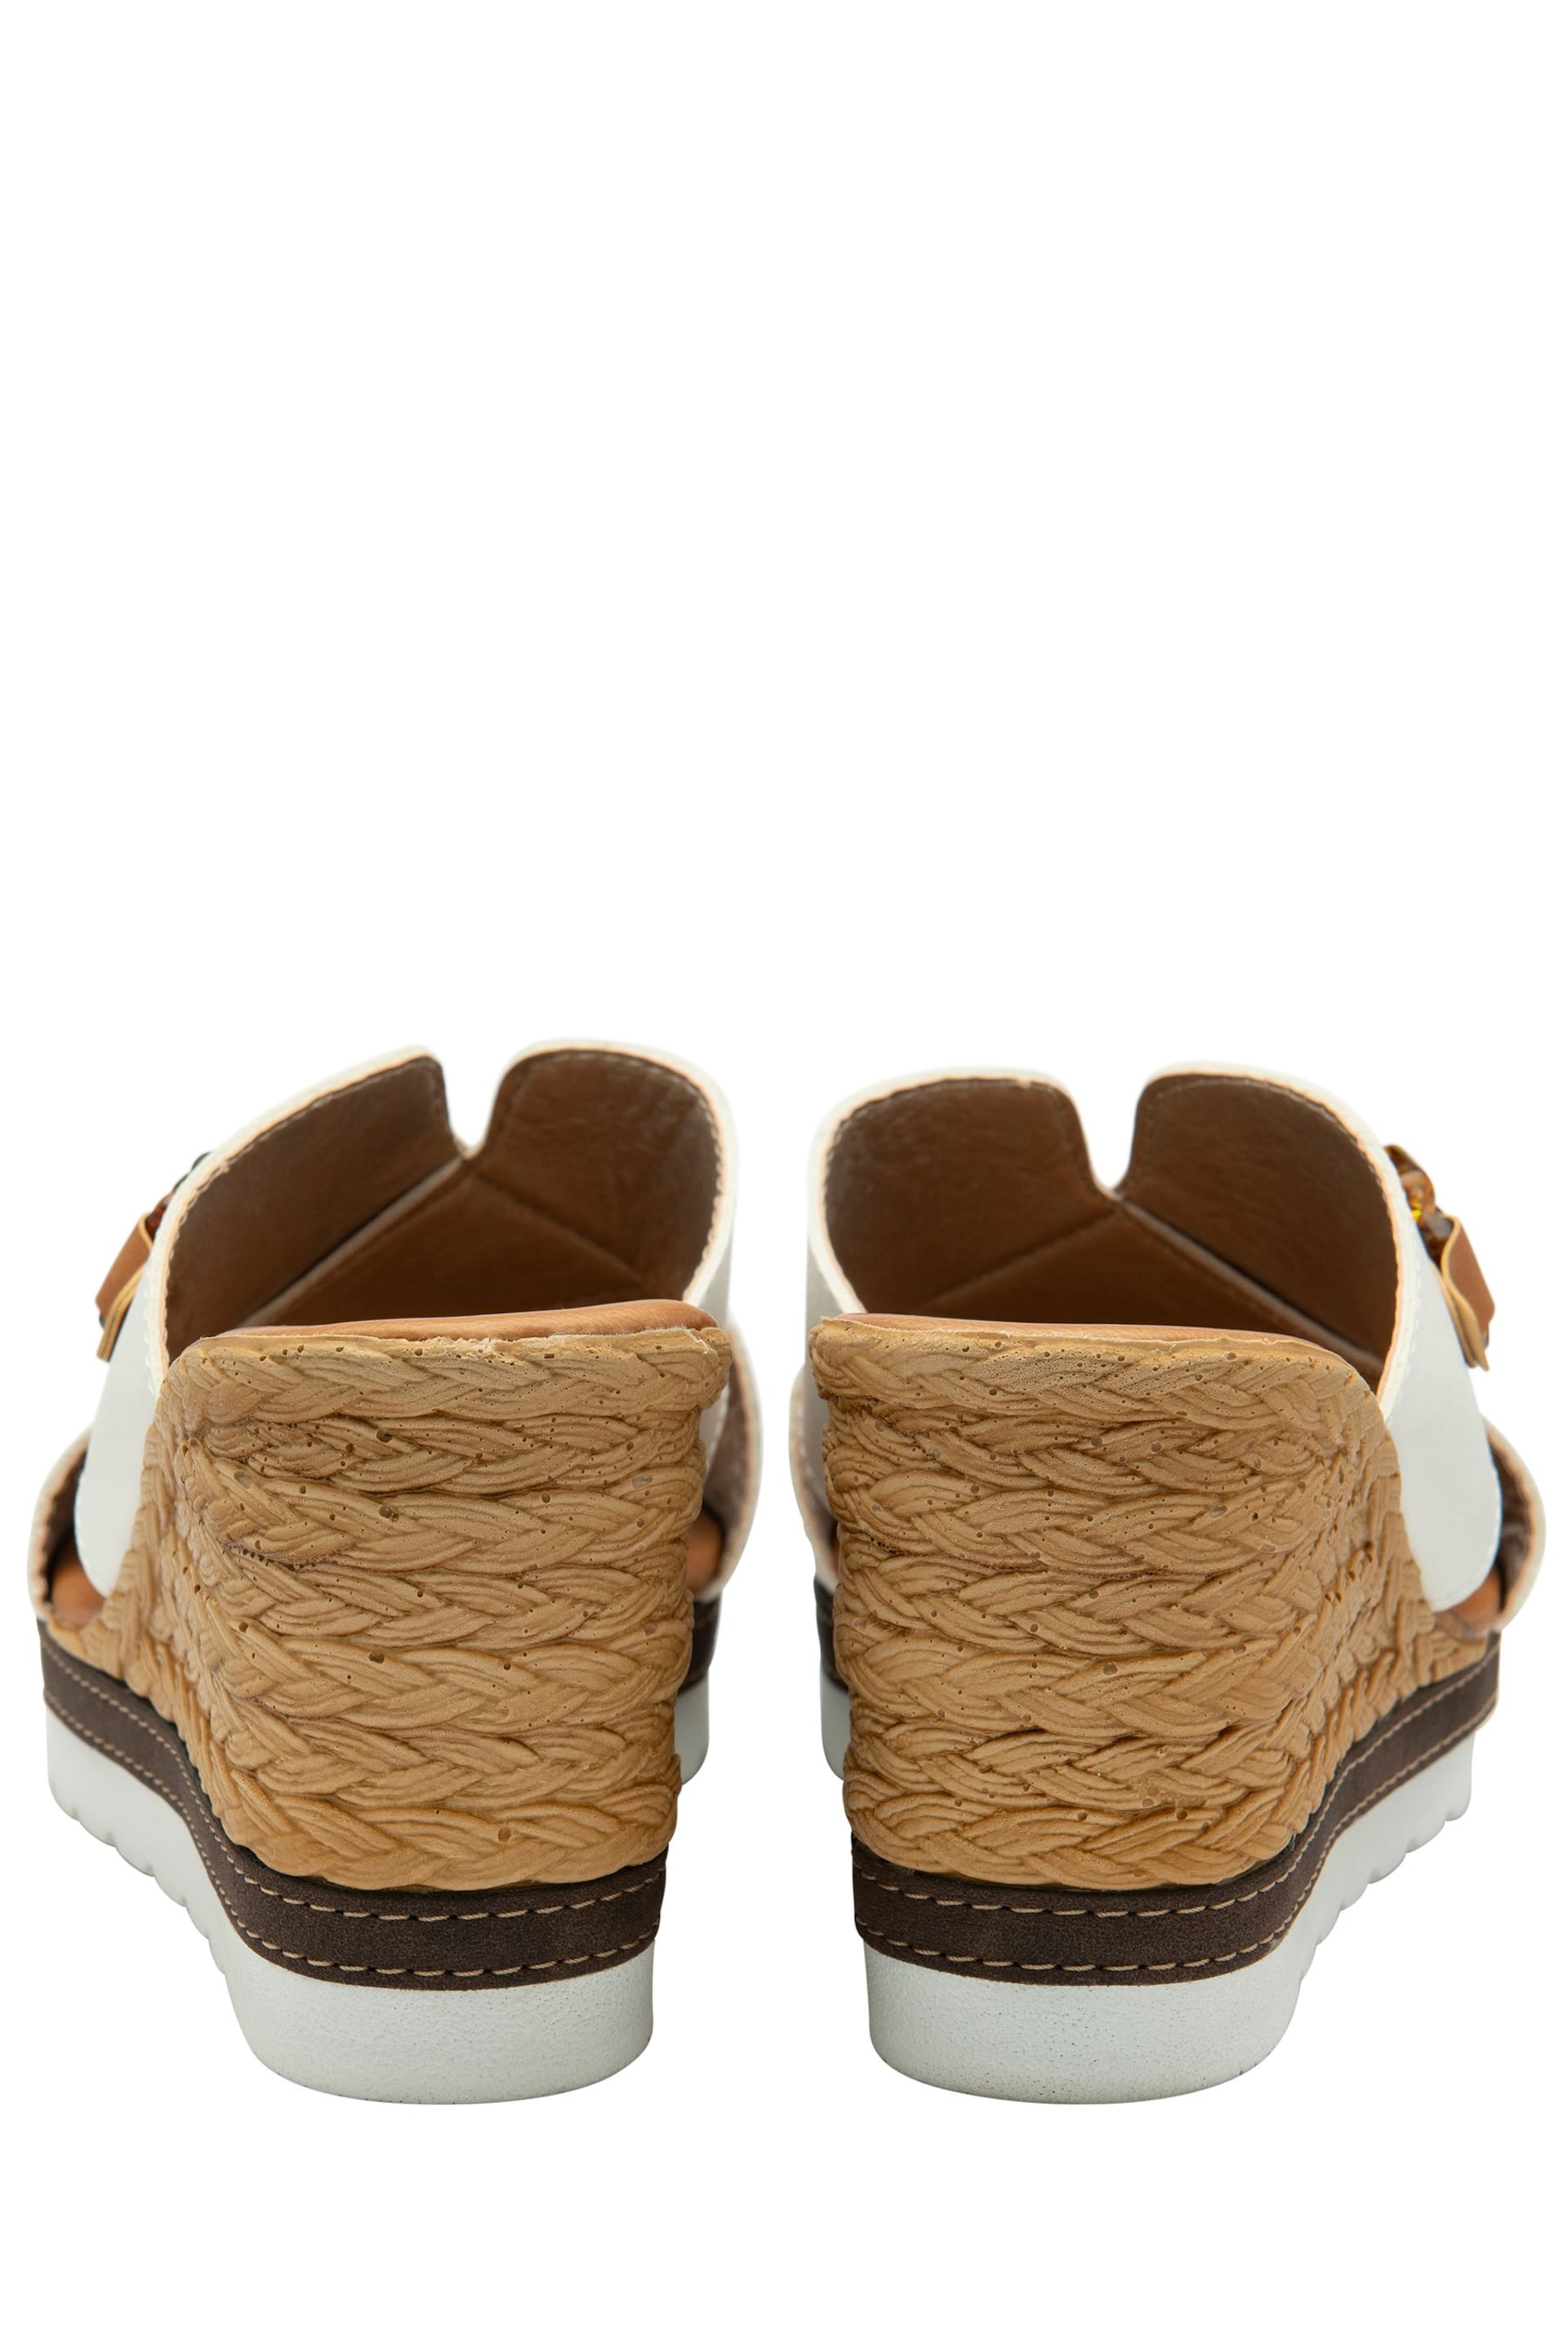 Lotus White Casual Wedge Mule Sandals - Image 3 of 4